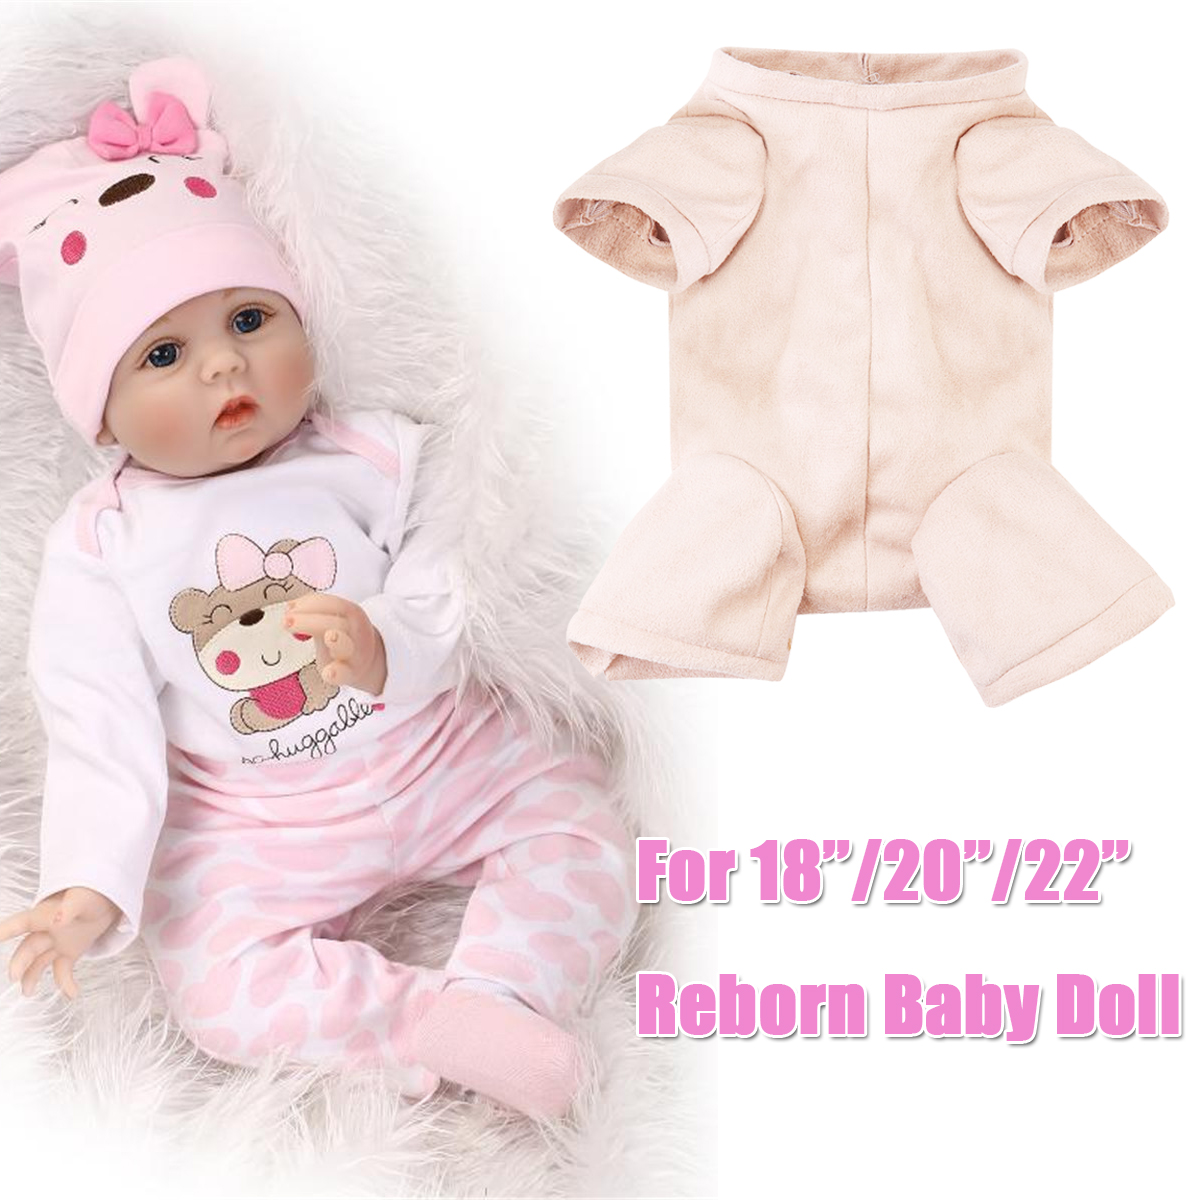 18-20-22-Reborn-Doll-Cloth-Body-Girl-Boy-Kits-Accessories-Replacement-1421125-3